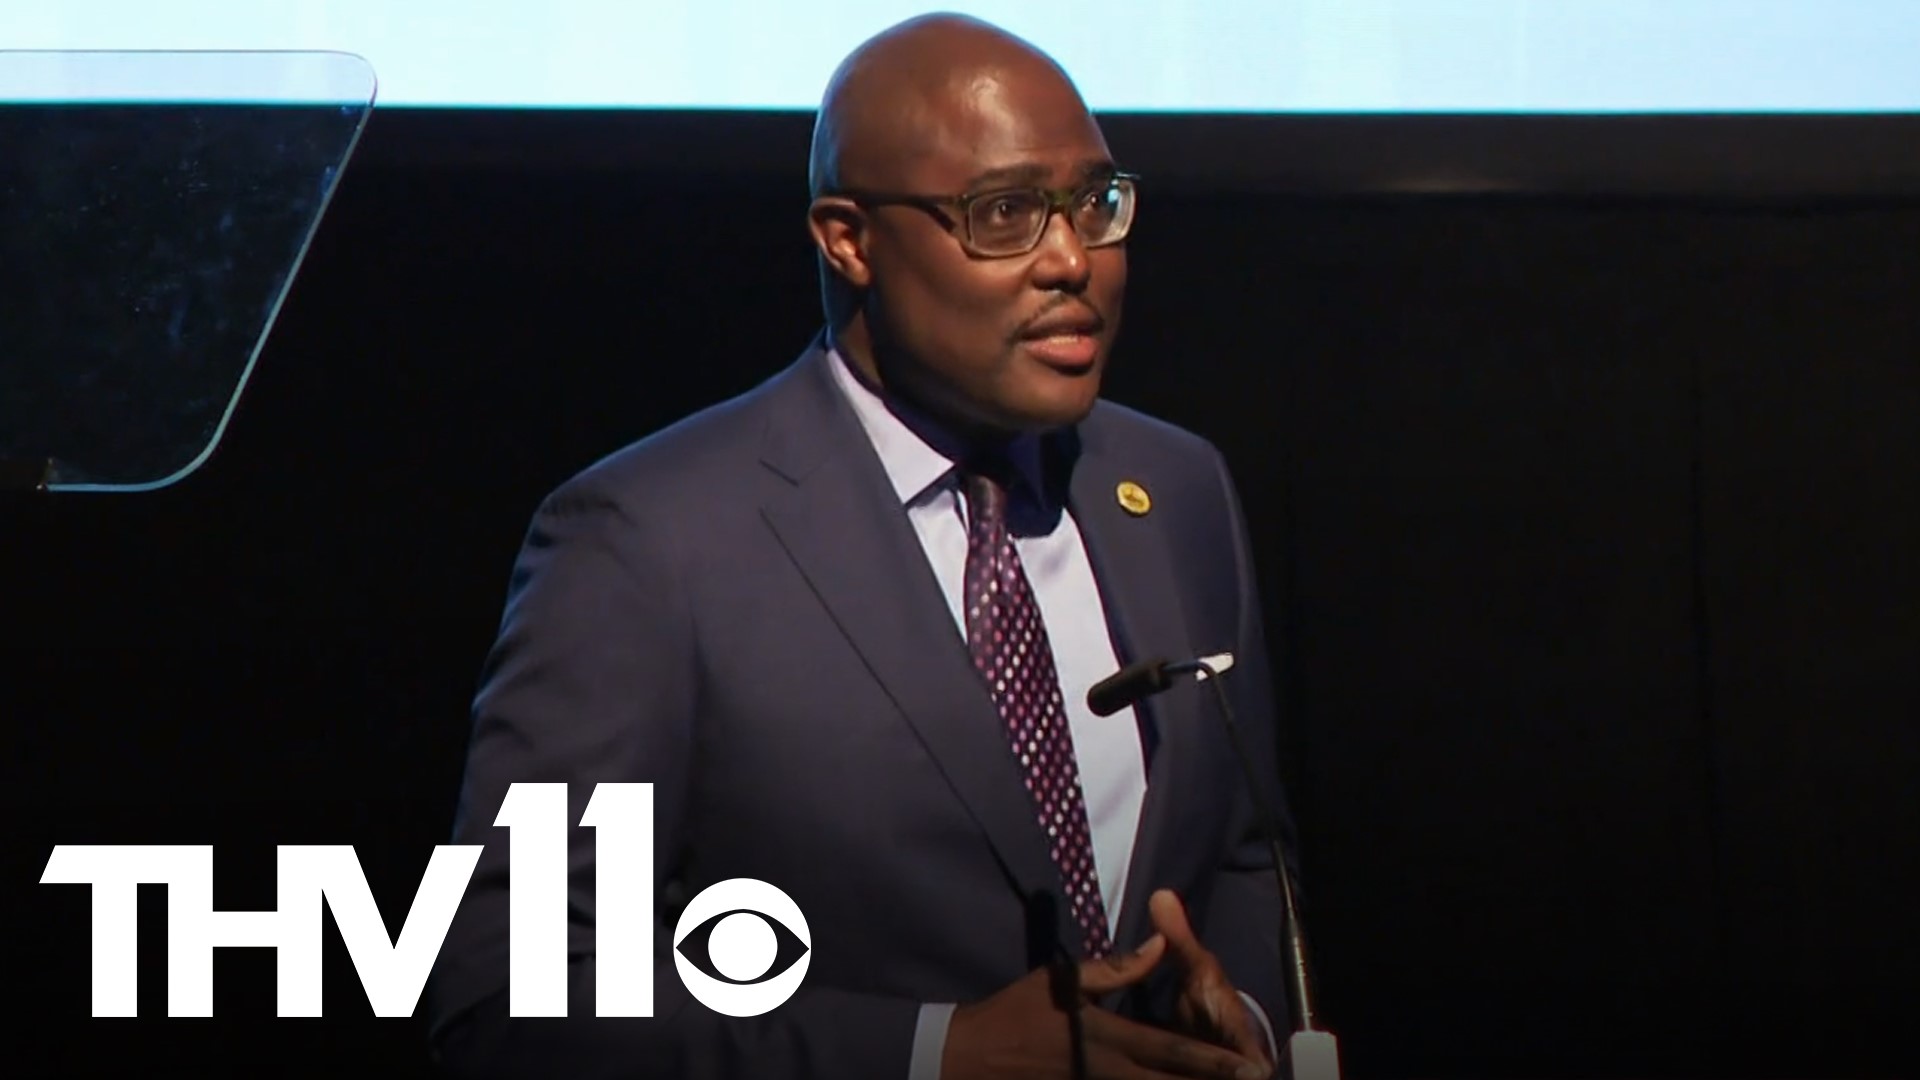 Mayor Frank Scott Jr. focused on what he plans to do to combat violent crime in Little Rock including more community police officers and safety.